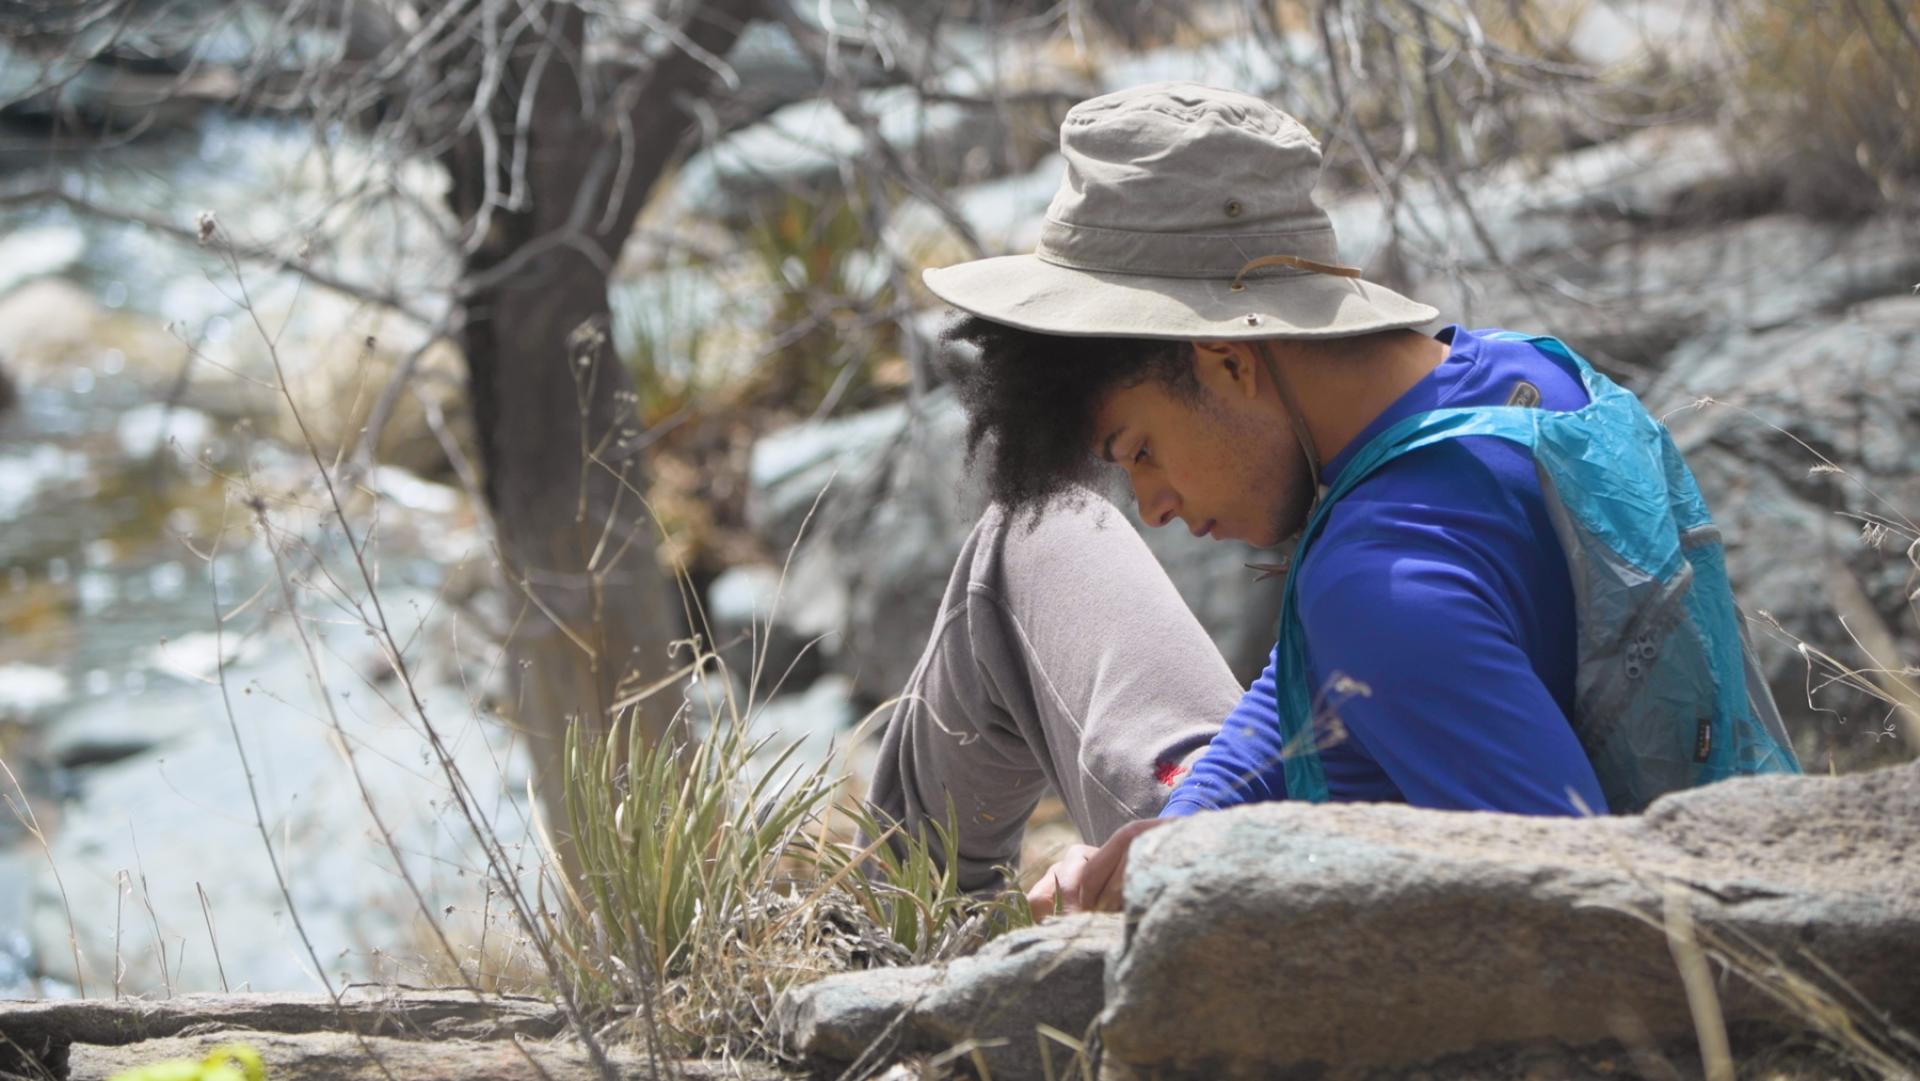 Person seated and wearing a brimmed hat, bent over and looking at something, with rocks and trees in the background